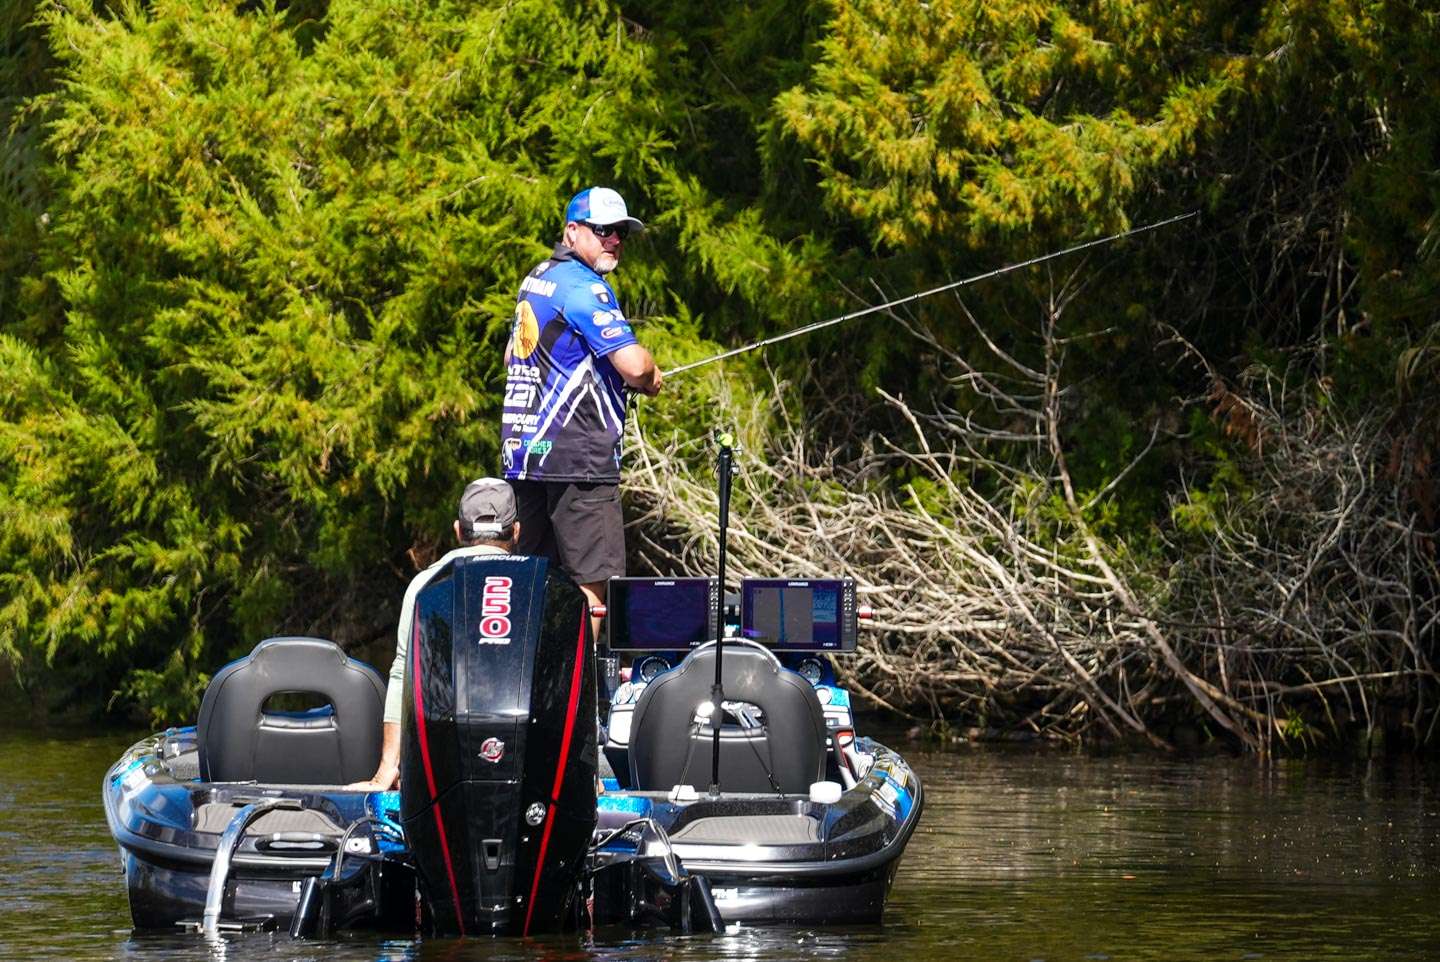  Later in the day, a large number of anglers made their way back to the canal. One of those anglers was Jamie Hartman, who was having a solid day to this point. 

